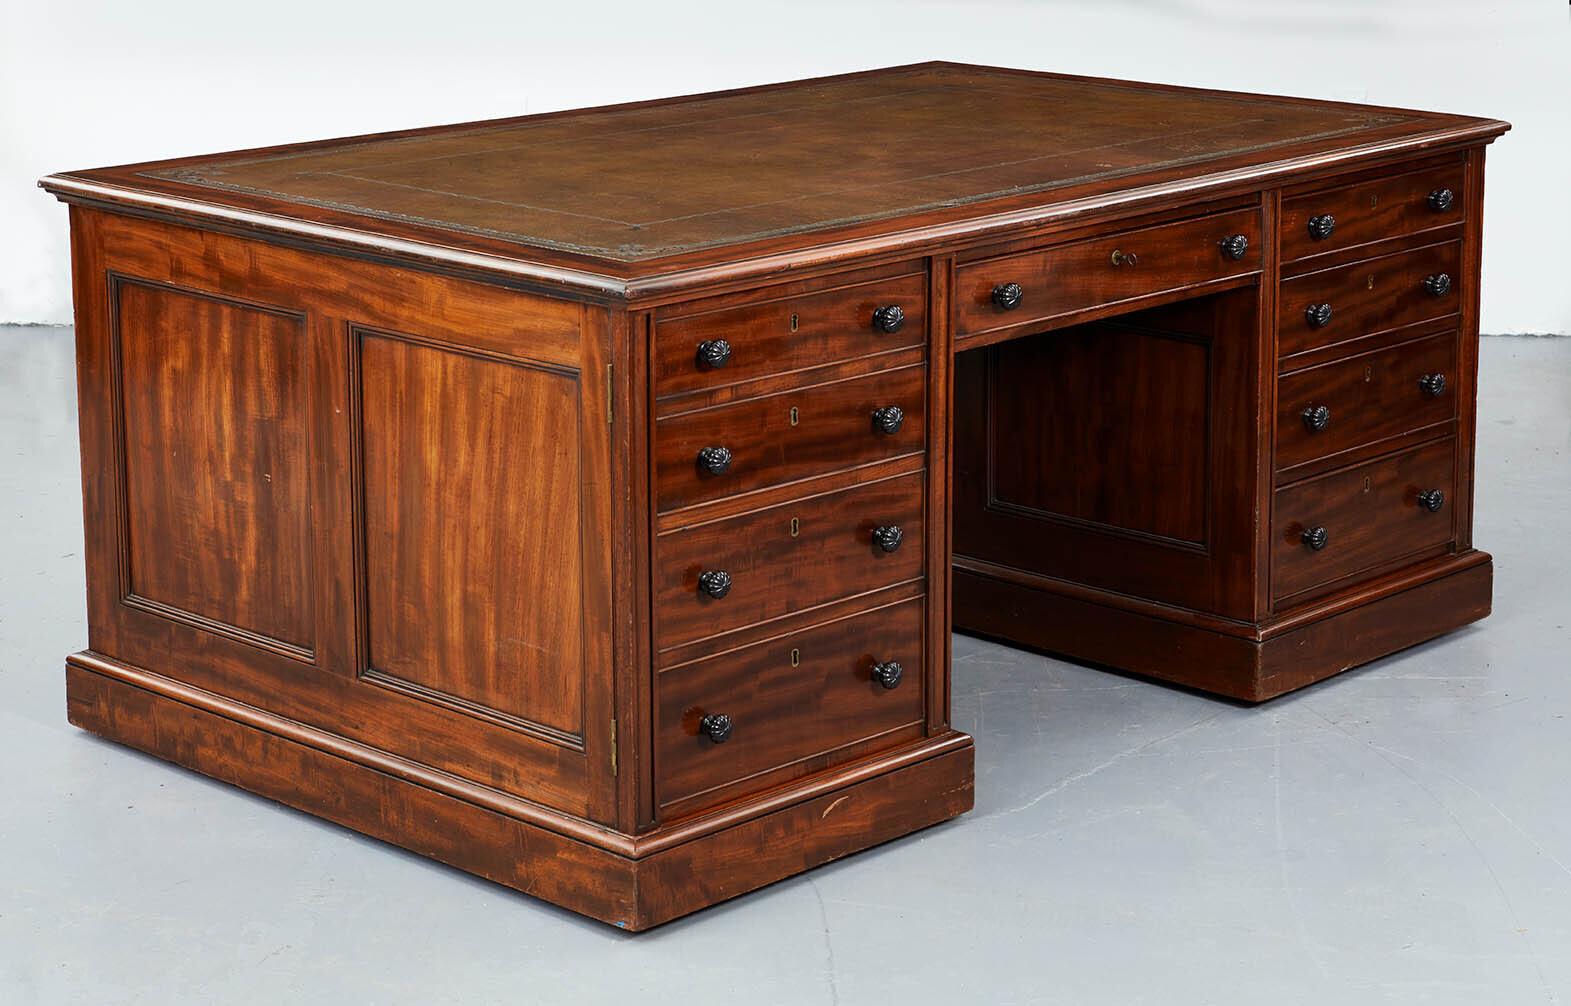 Very fine George IV mahogany and ebony partners desk by Gillows of Lancaster, circa 1825, the tooled double border leather top with cross banding and carved edge, over drawers, the center ones with makers stamp and all with original locks, over two